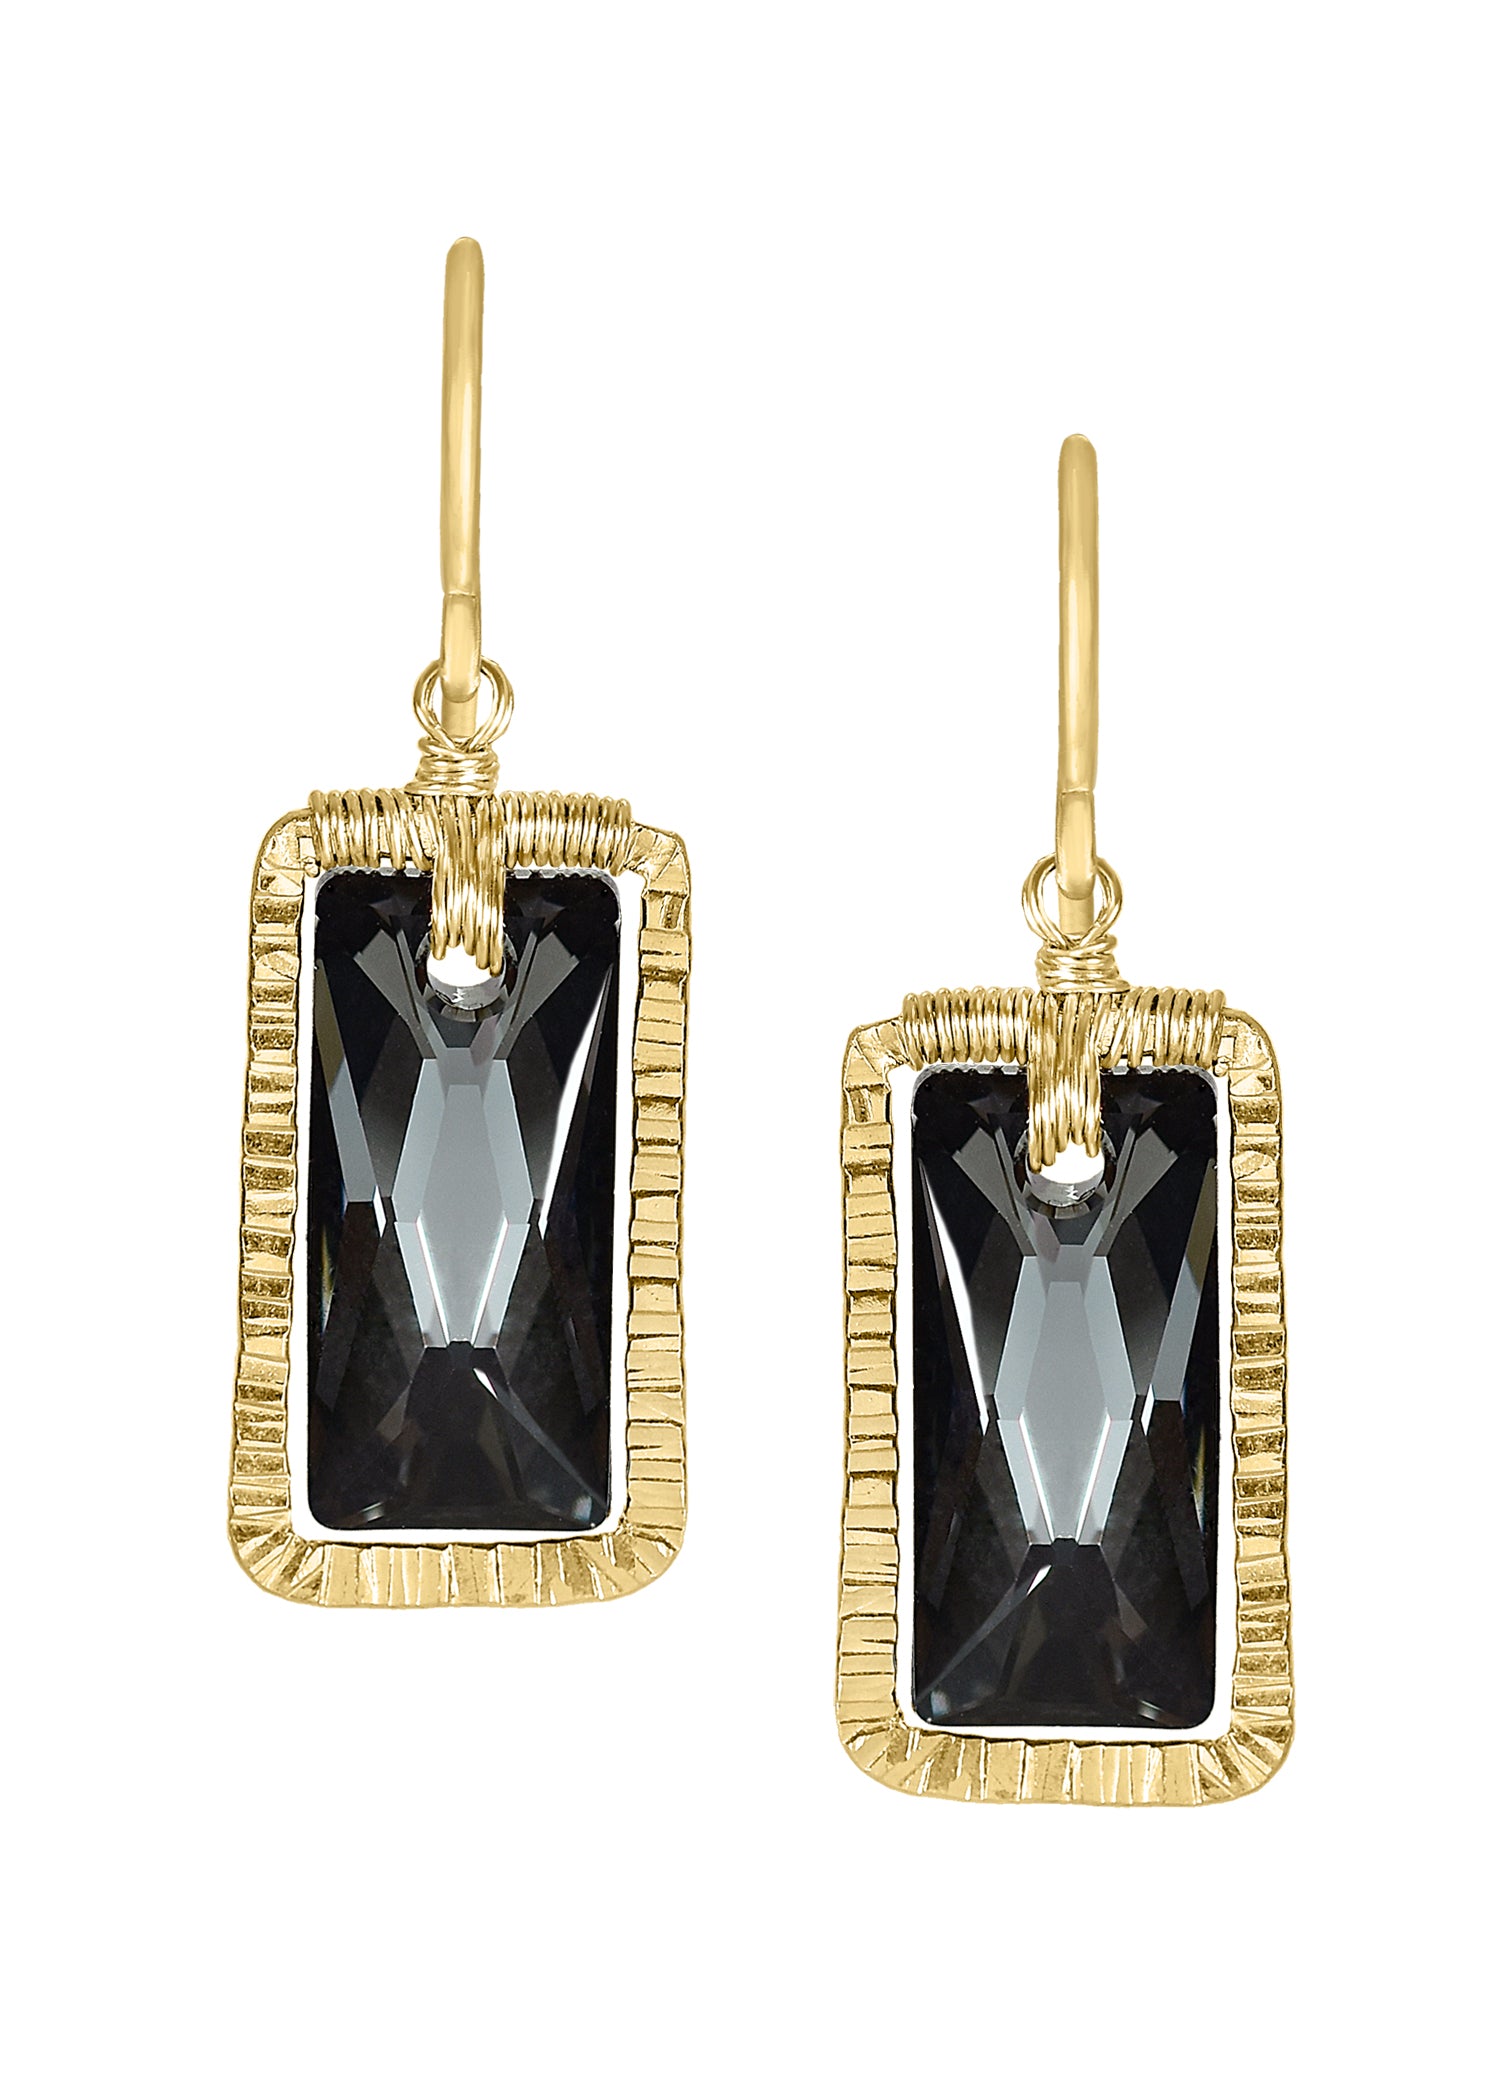 Crystal 14k gold fill Earrings measure 1-1/8" in length (including the ear wires) and 3/8" in width Handmade in our Los Angeles studio